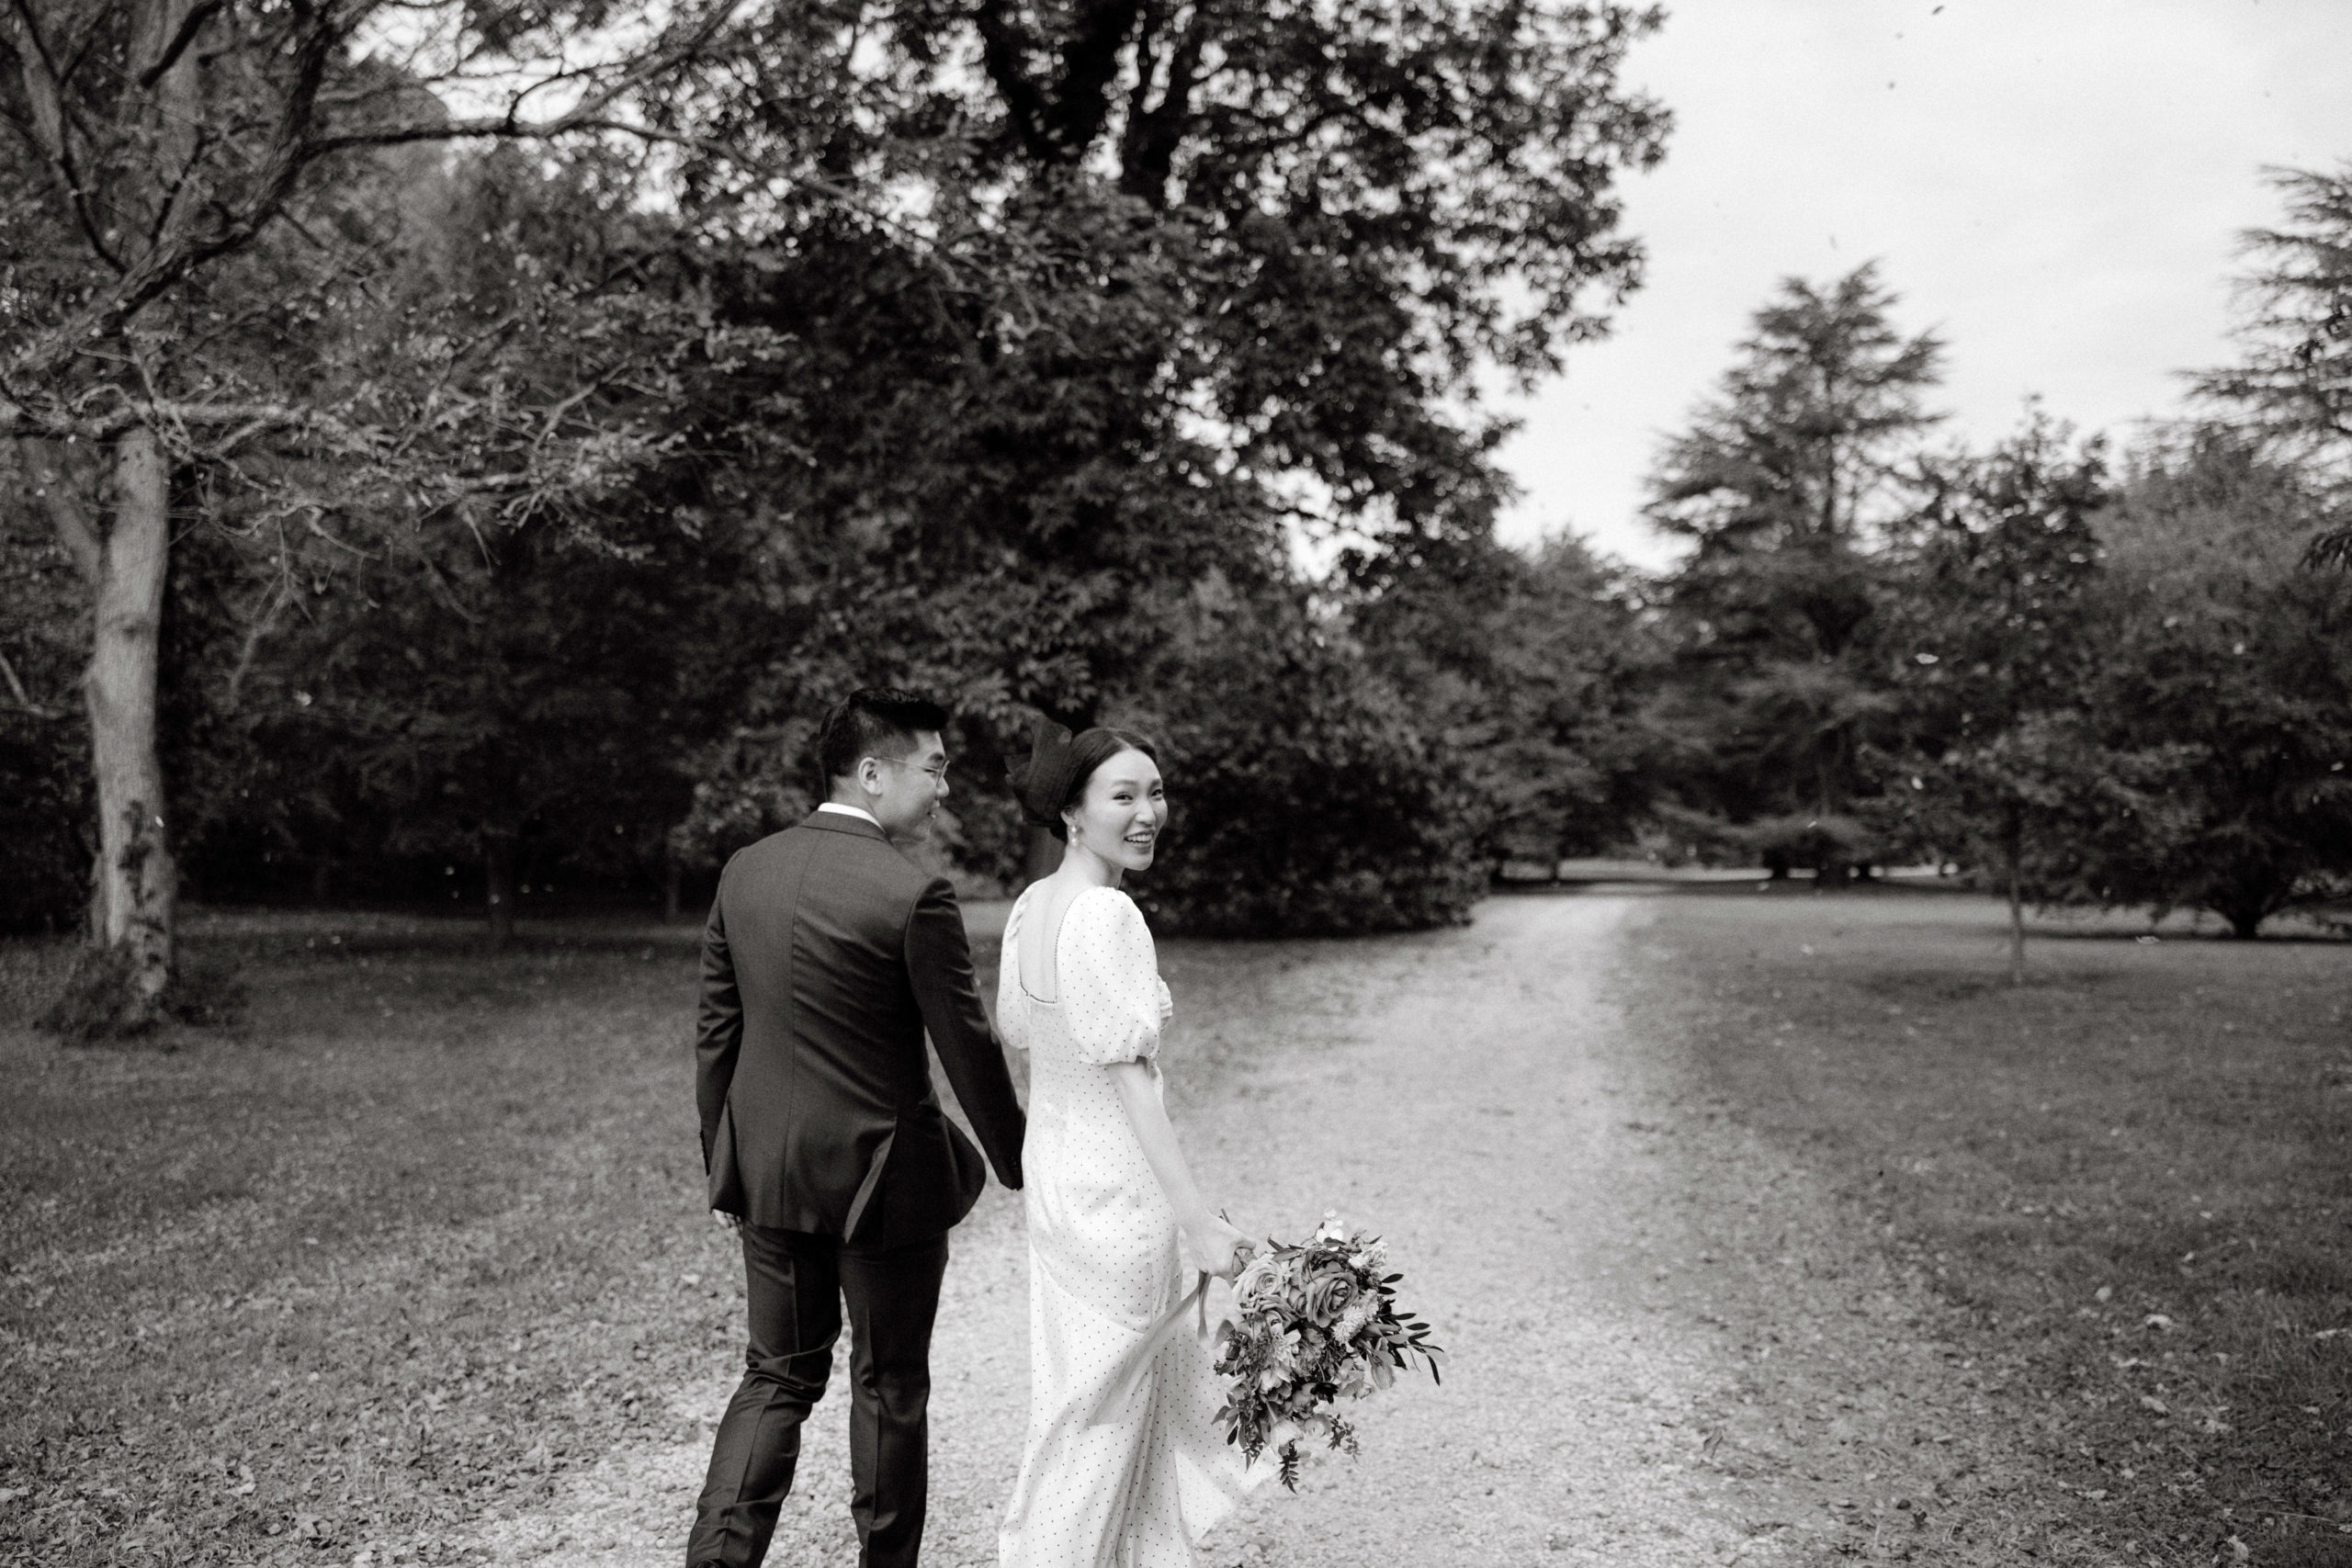 Candid black and white photo of the engaged couple walking in the grounds of Planting Fields Arboretum, NY. Engagement session photo by Jenny Fu Studio